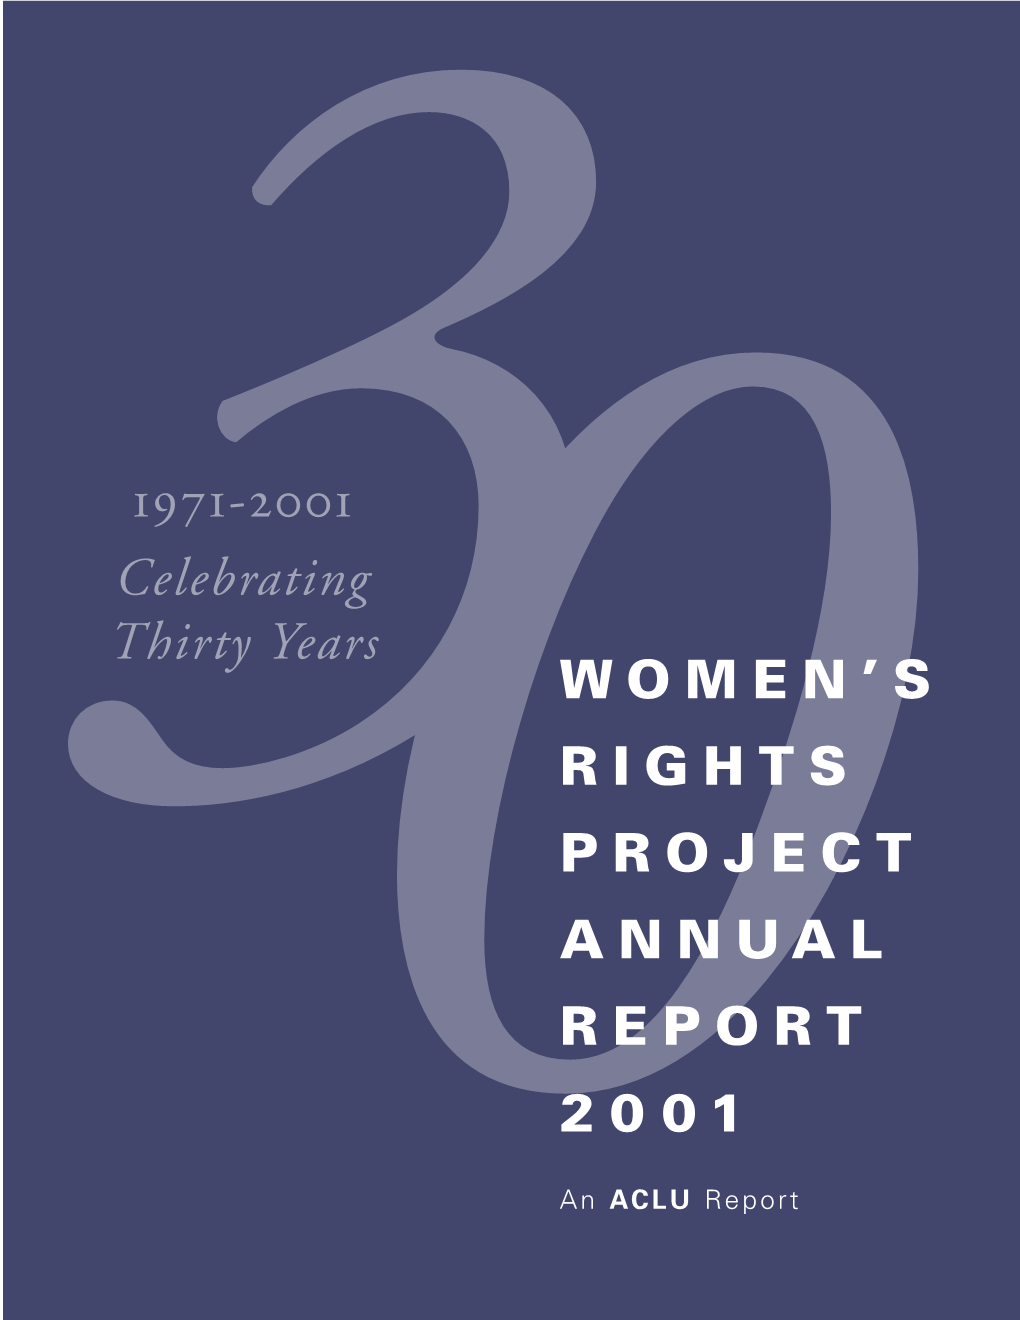 Women's Rights Project Annual Report 2001